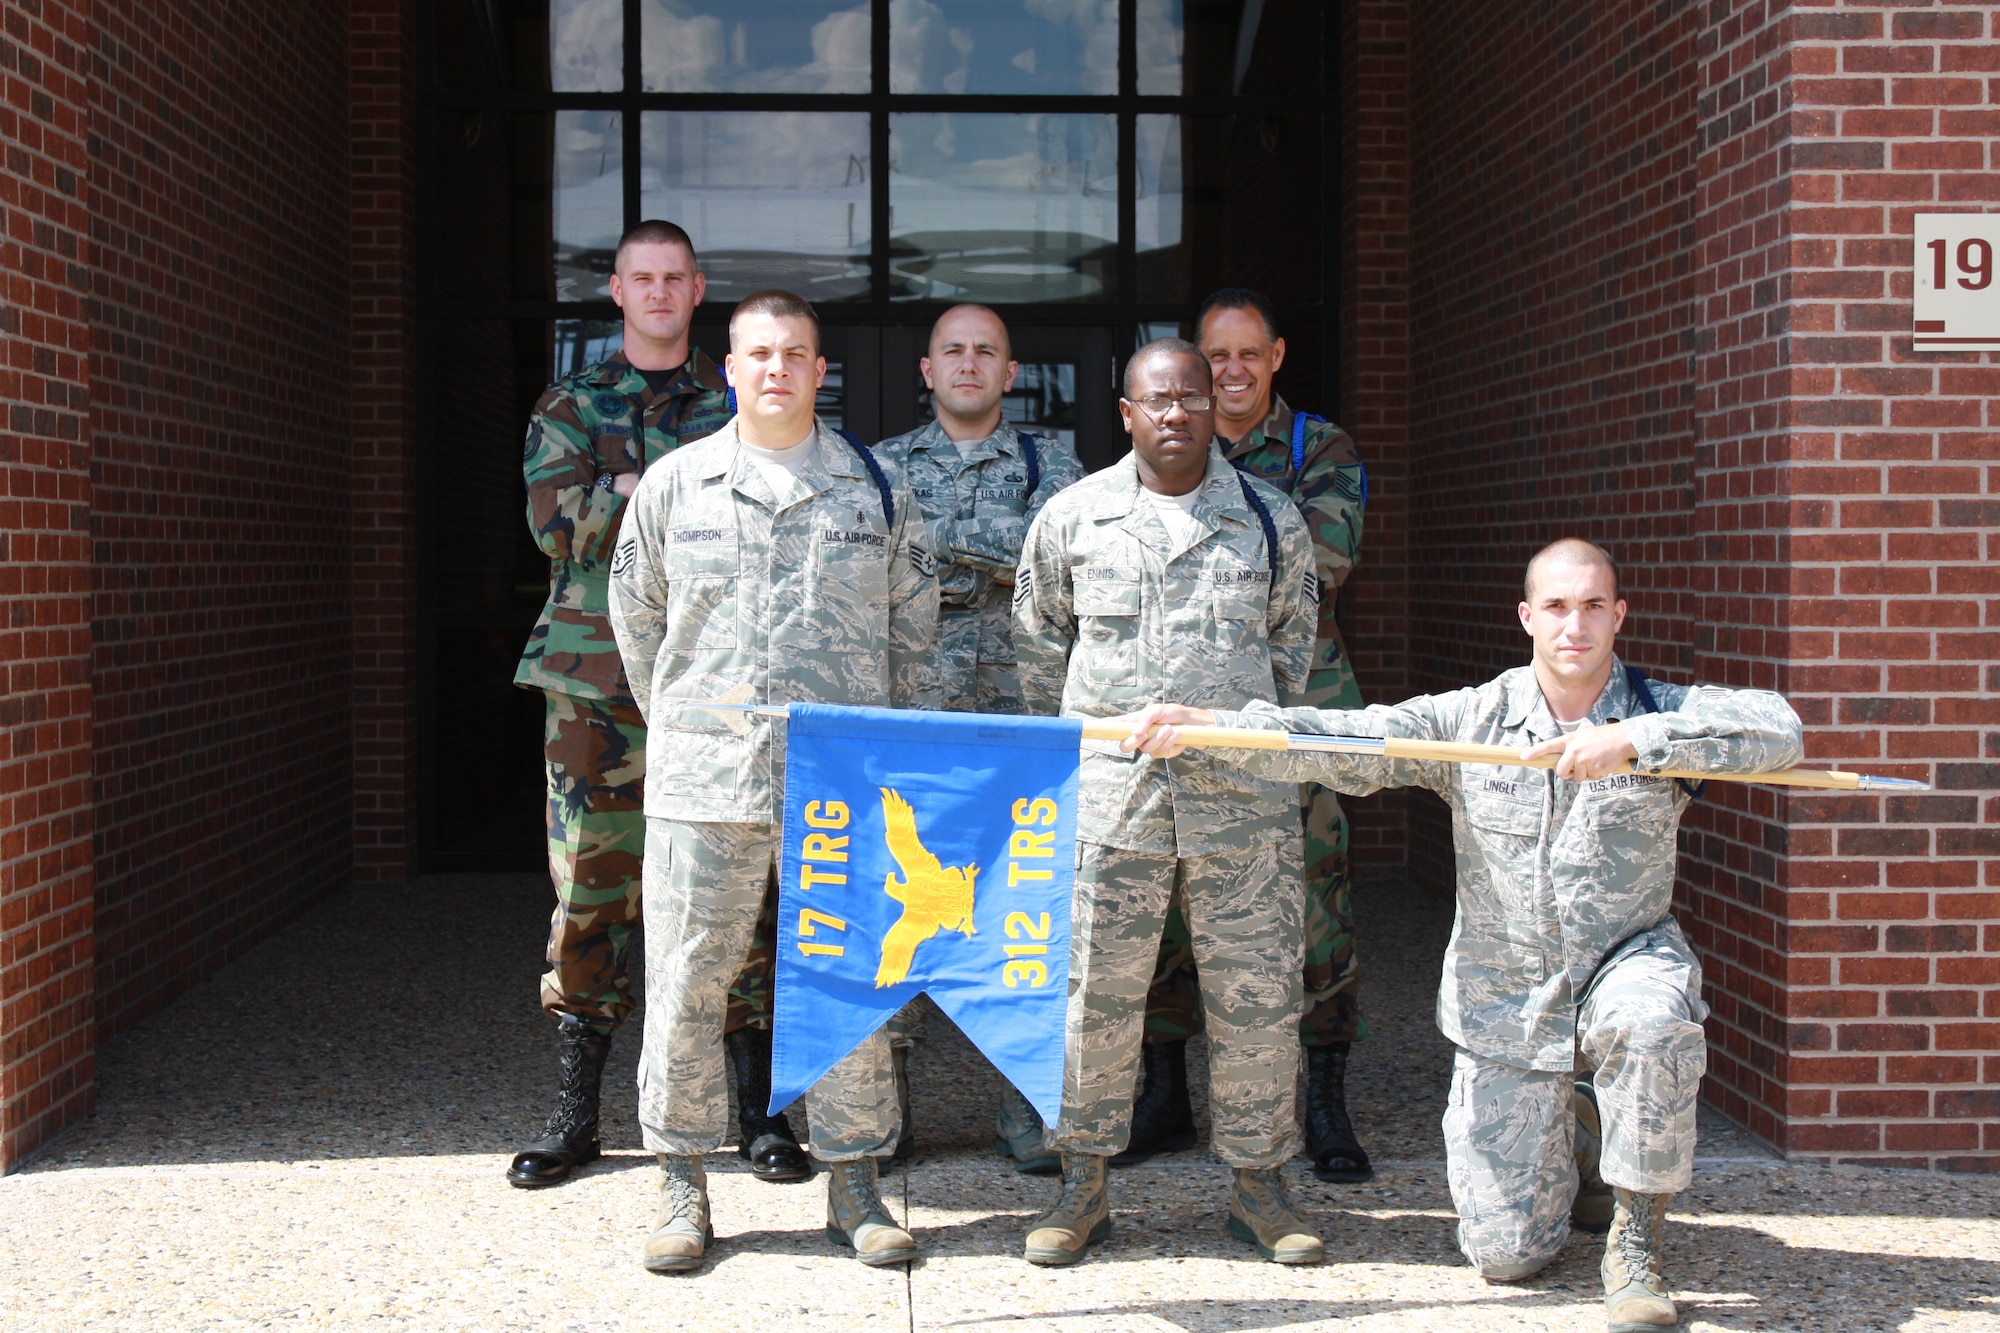 Military Training Leaders provide solid groundwork that help our professional Airmen become successful. MTLs from the 312th Training Squadron are (from left): Staff Sgt. Josh Cartwright, Staff Sgt. Jacob Thompson, Tech. Sgt. David Lucas, Staff Sgt. Shaun Ennis, Master Sgt. Lucius Wilcox and Staff Sgt. Richard Lingle. Not pictured: Staff Sgt. David Arreola. (U.S. Air Force photo)